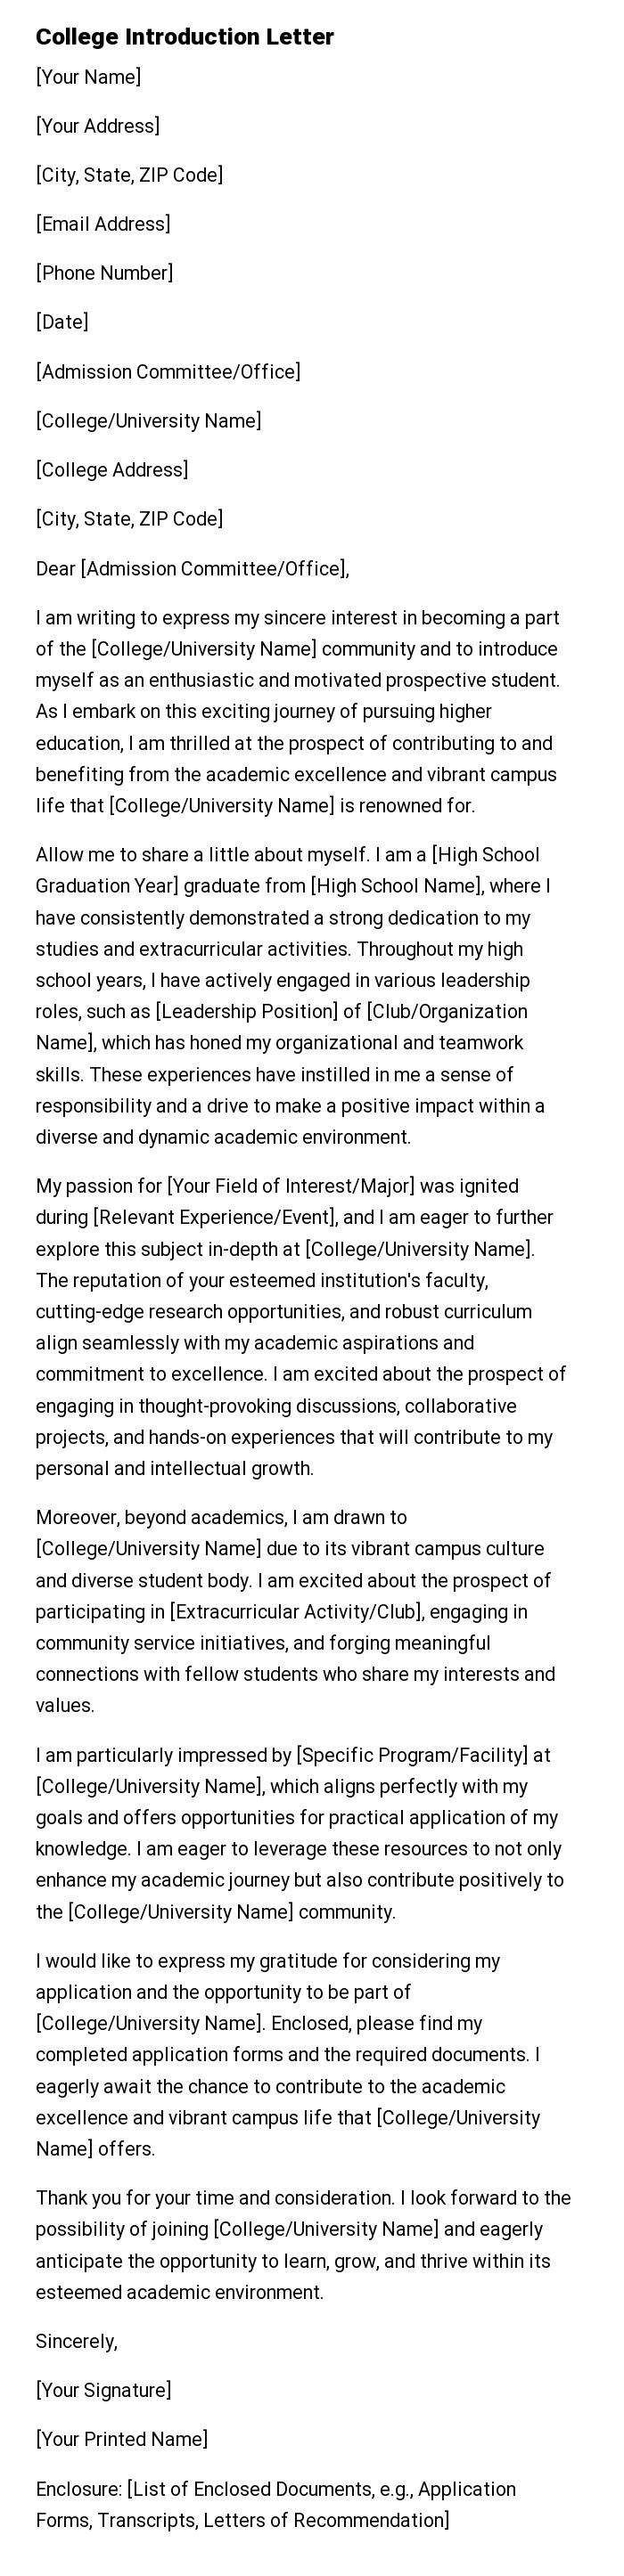 College Introduction Letter